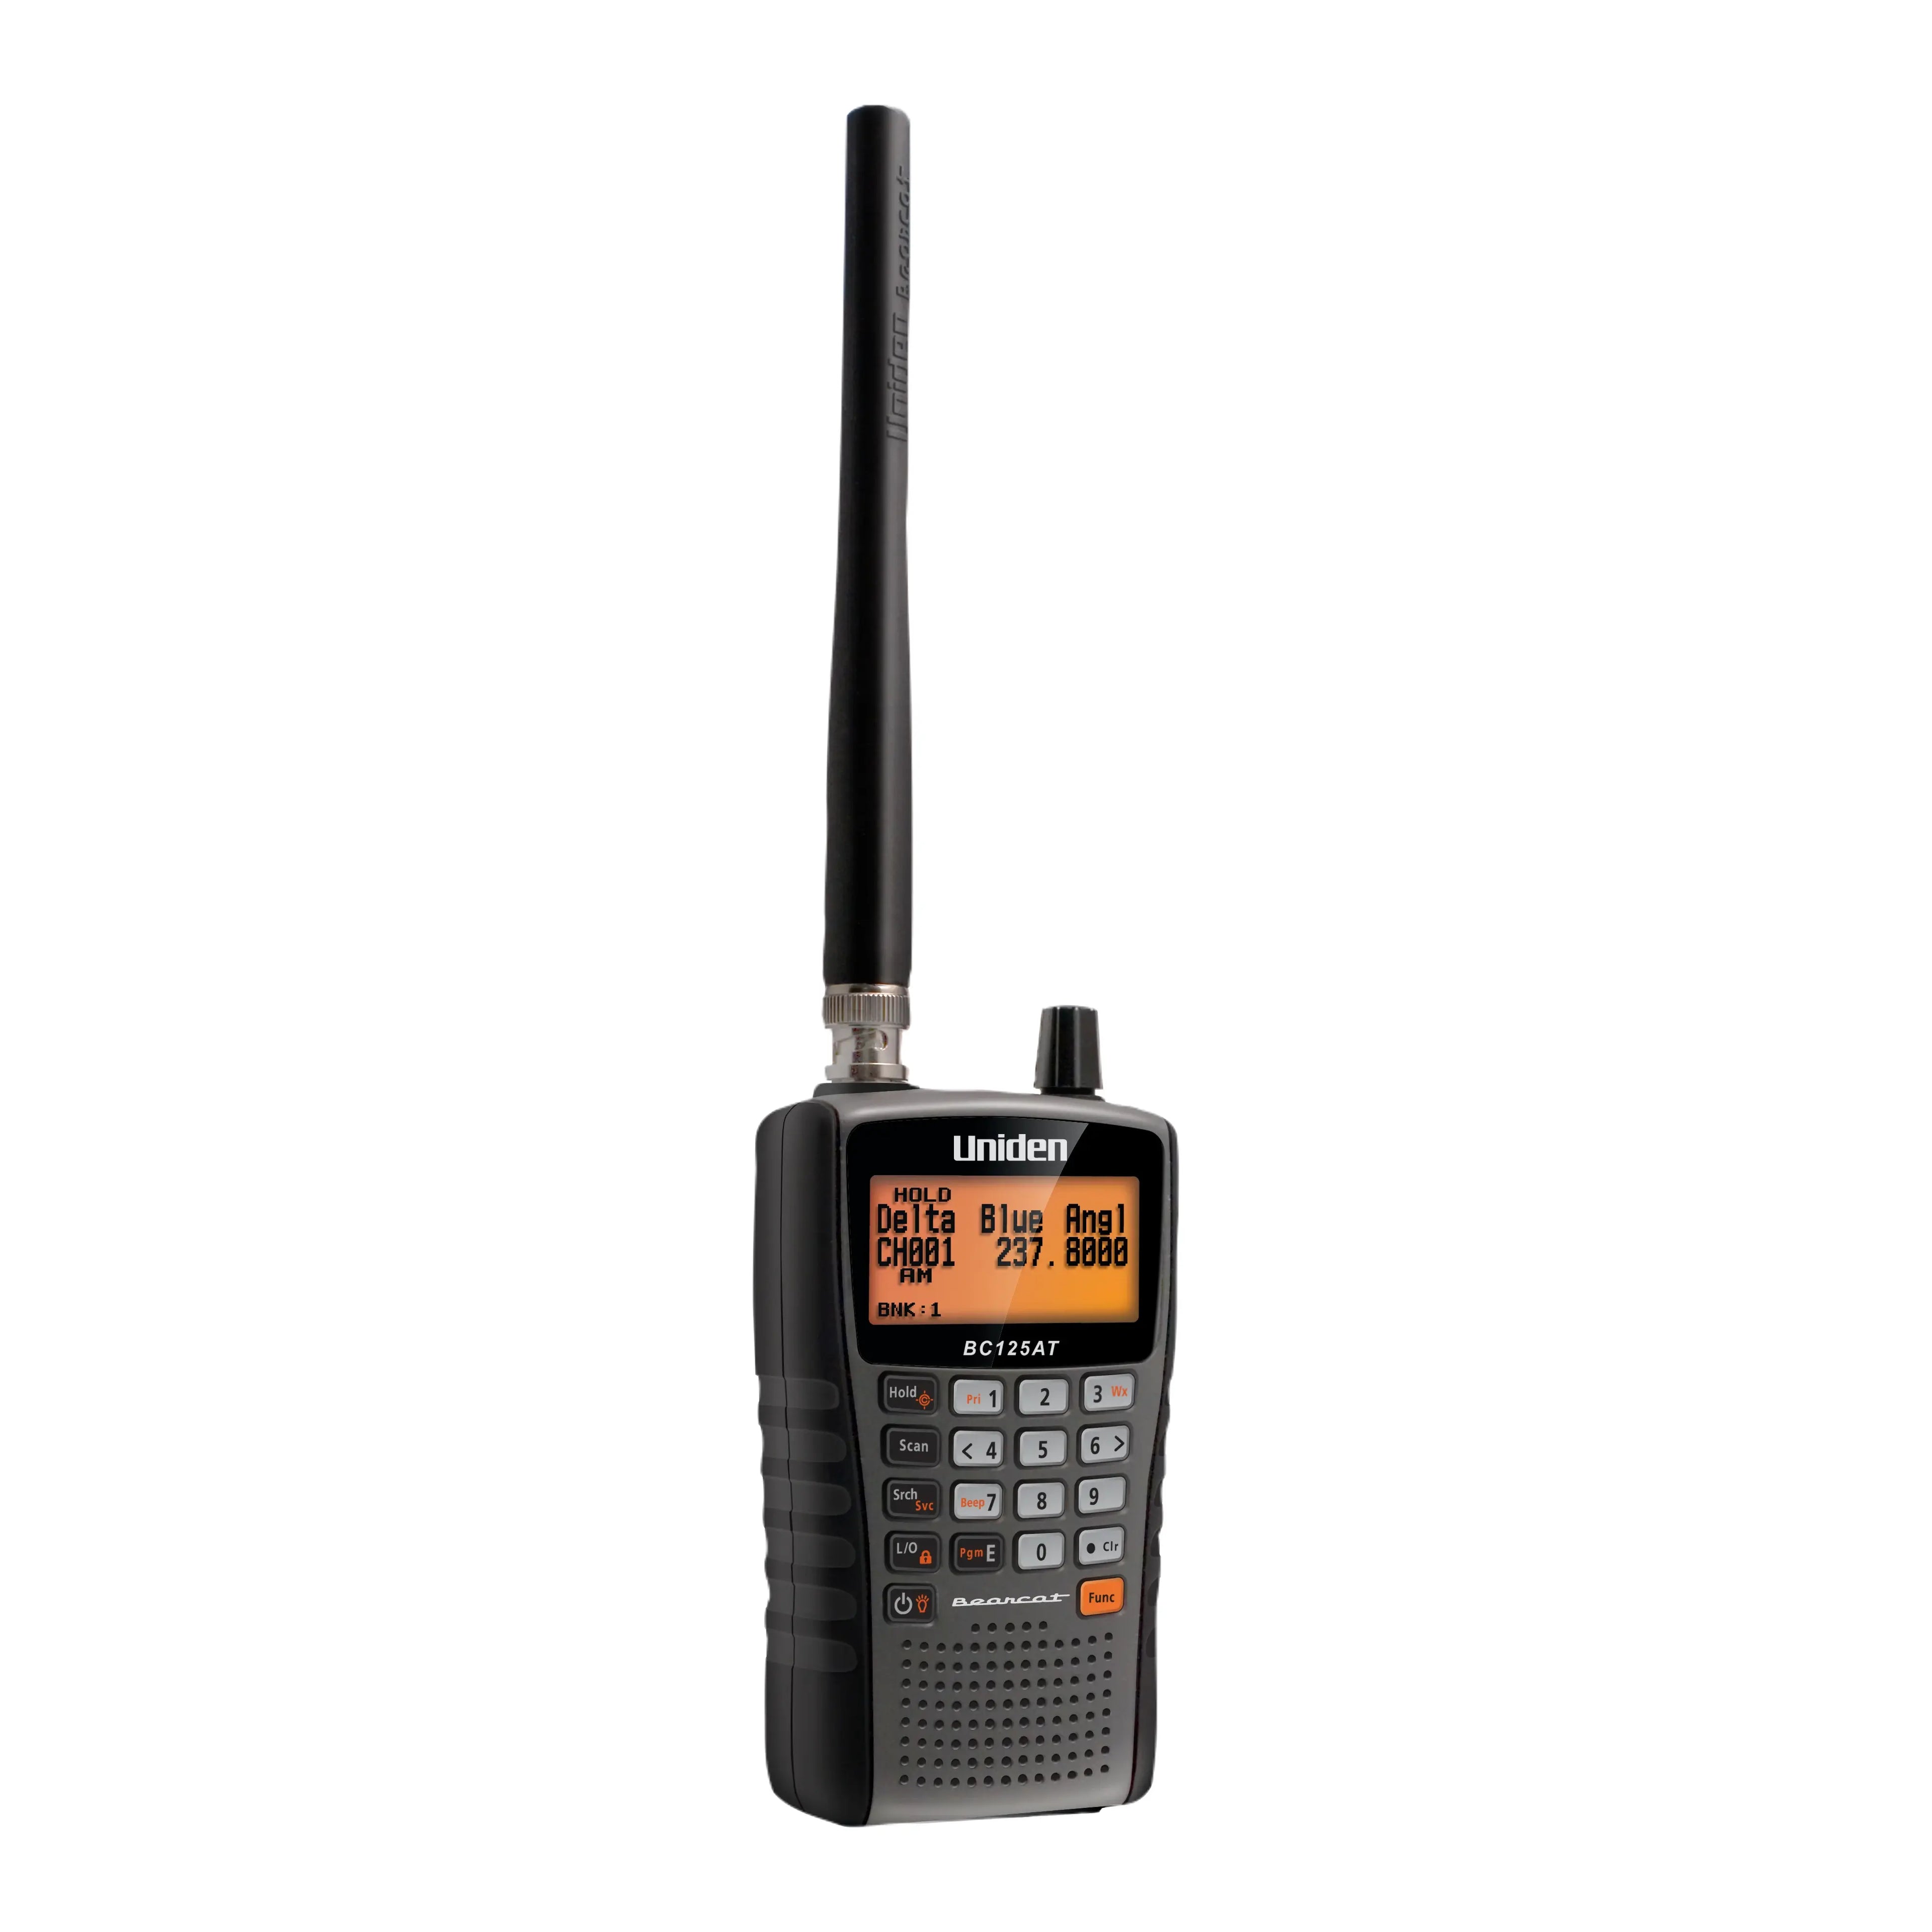 Uniden BC125AT 500 Channel Handheld Police Scanner Portable NASCAR Racing Fire